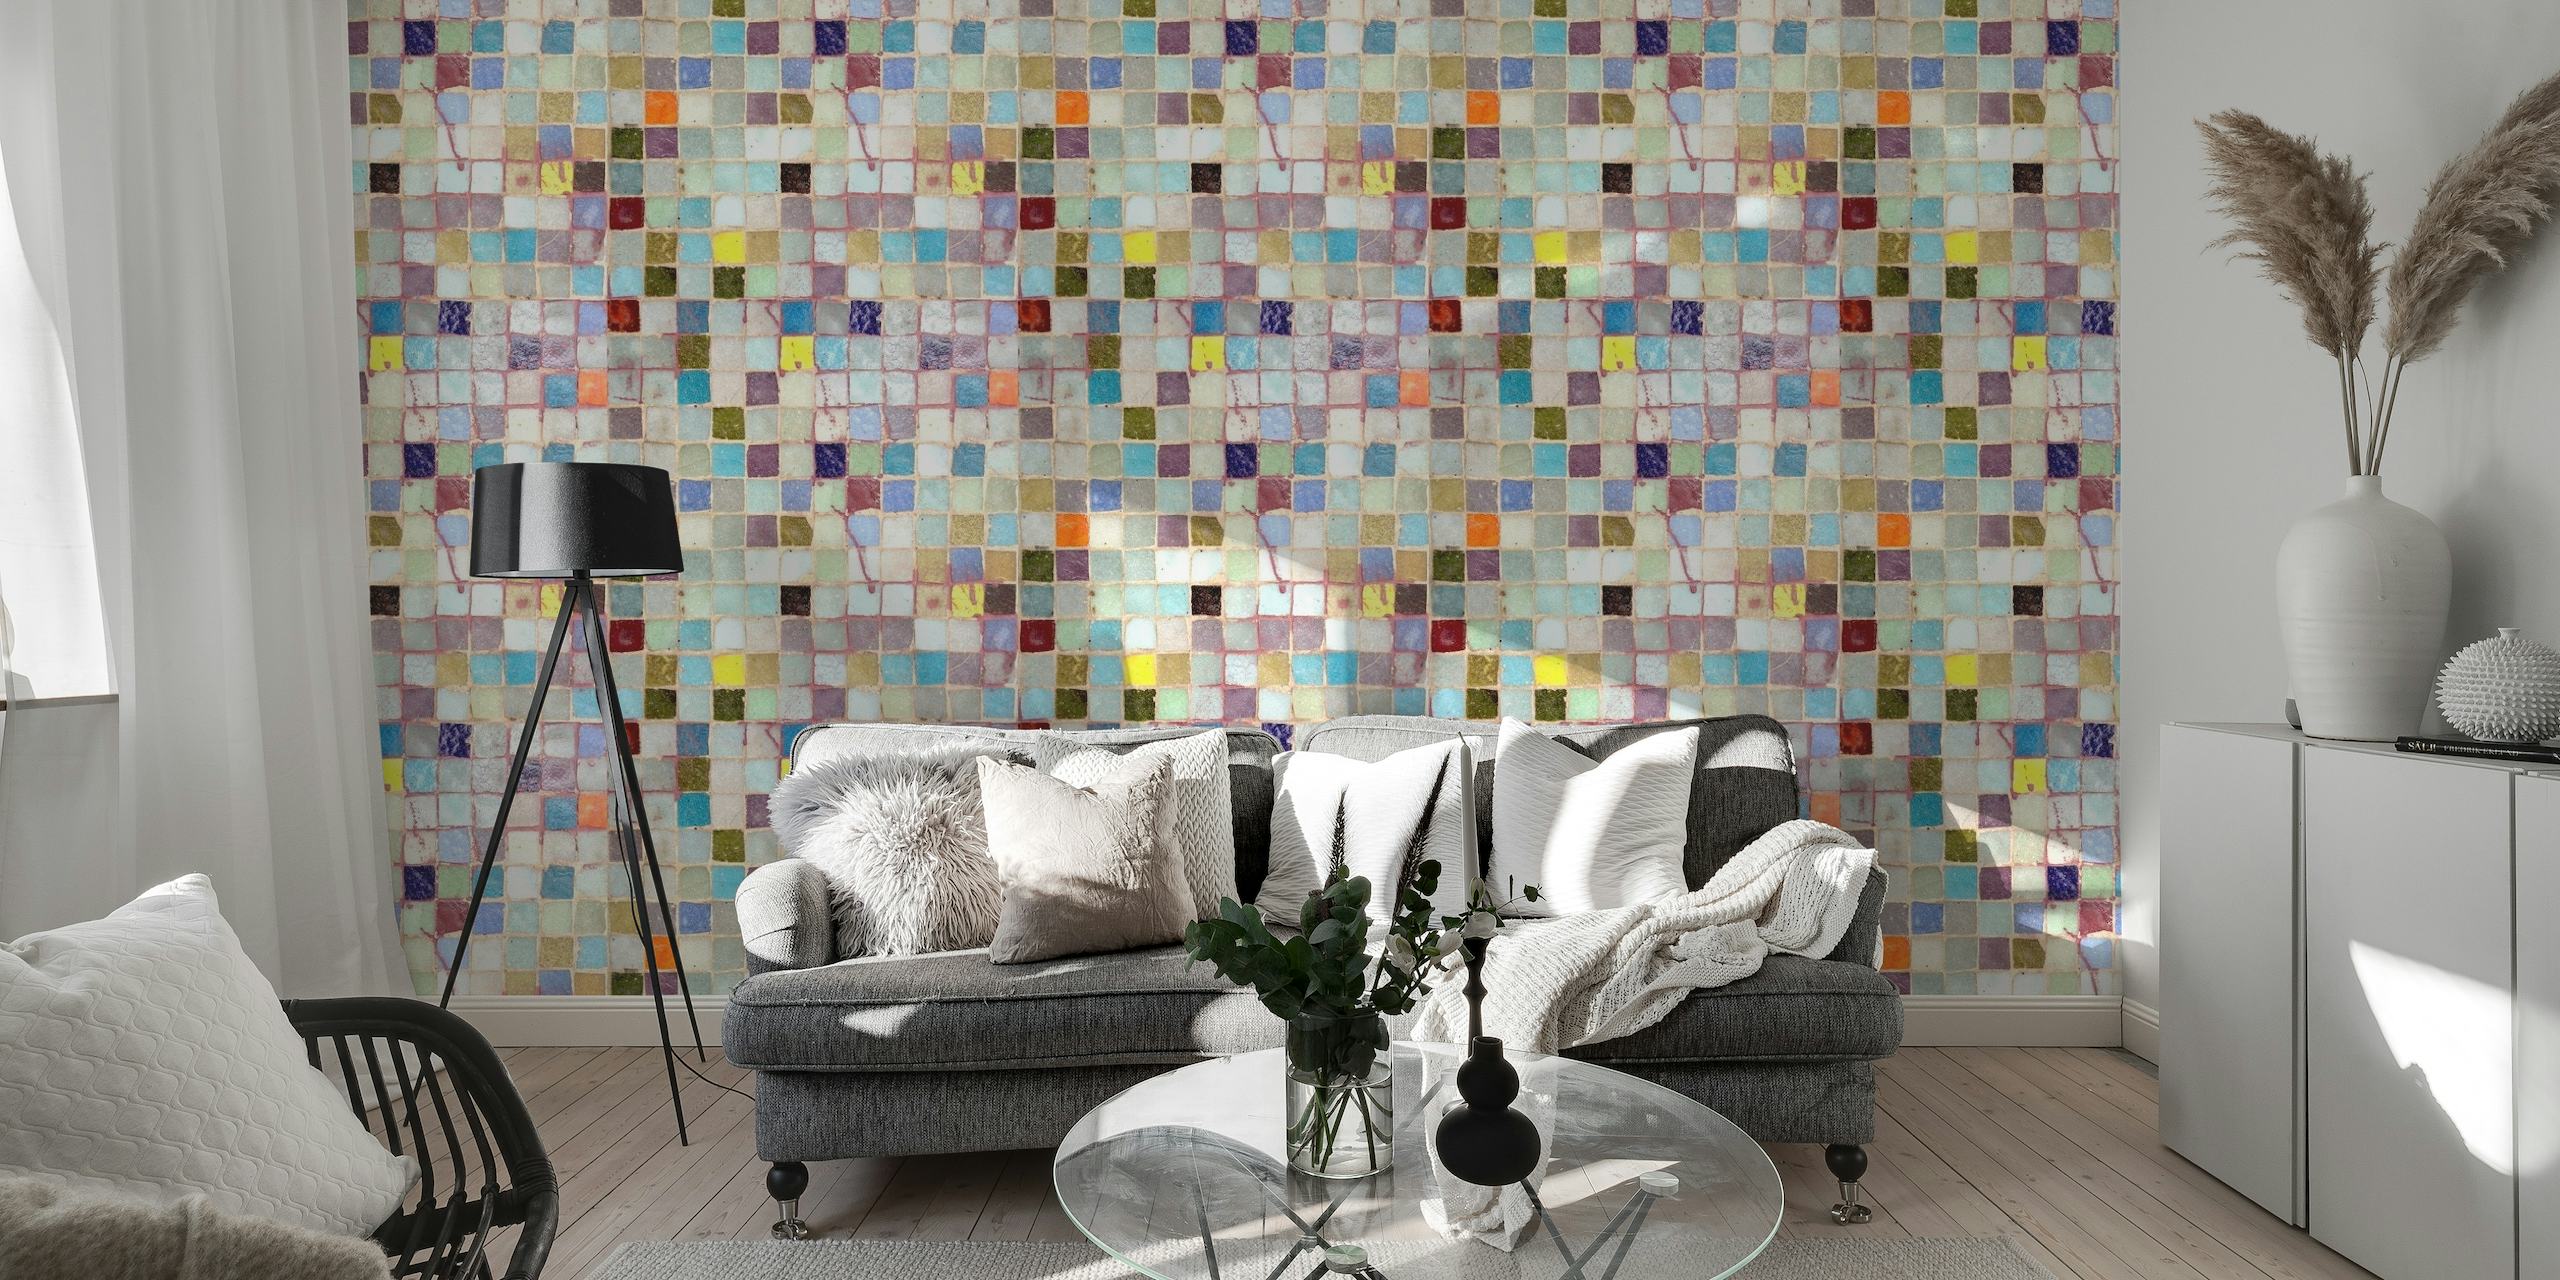 Mid-century modern inspired mosaic tile pattern wall mural with warm and cool tones